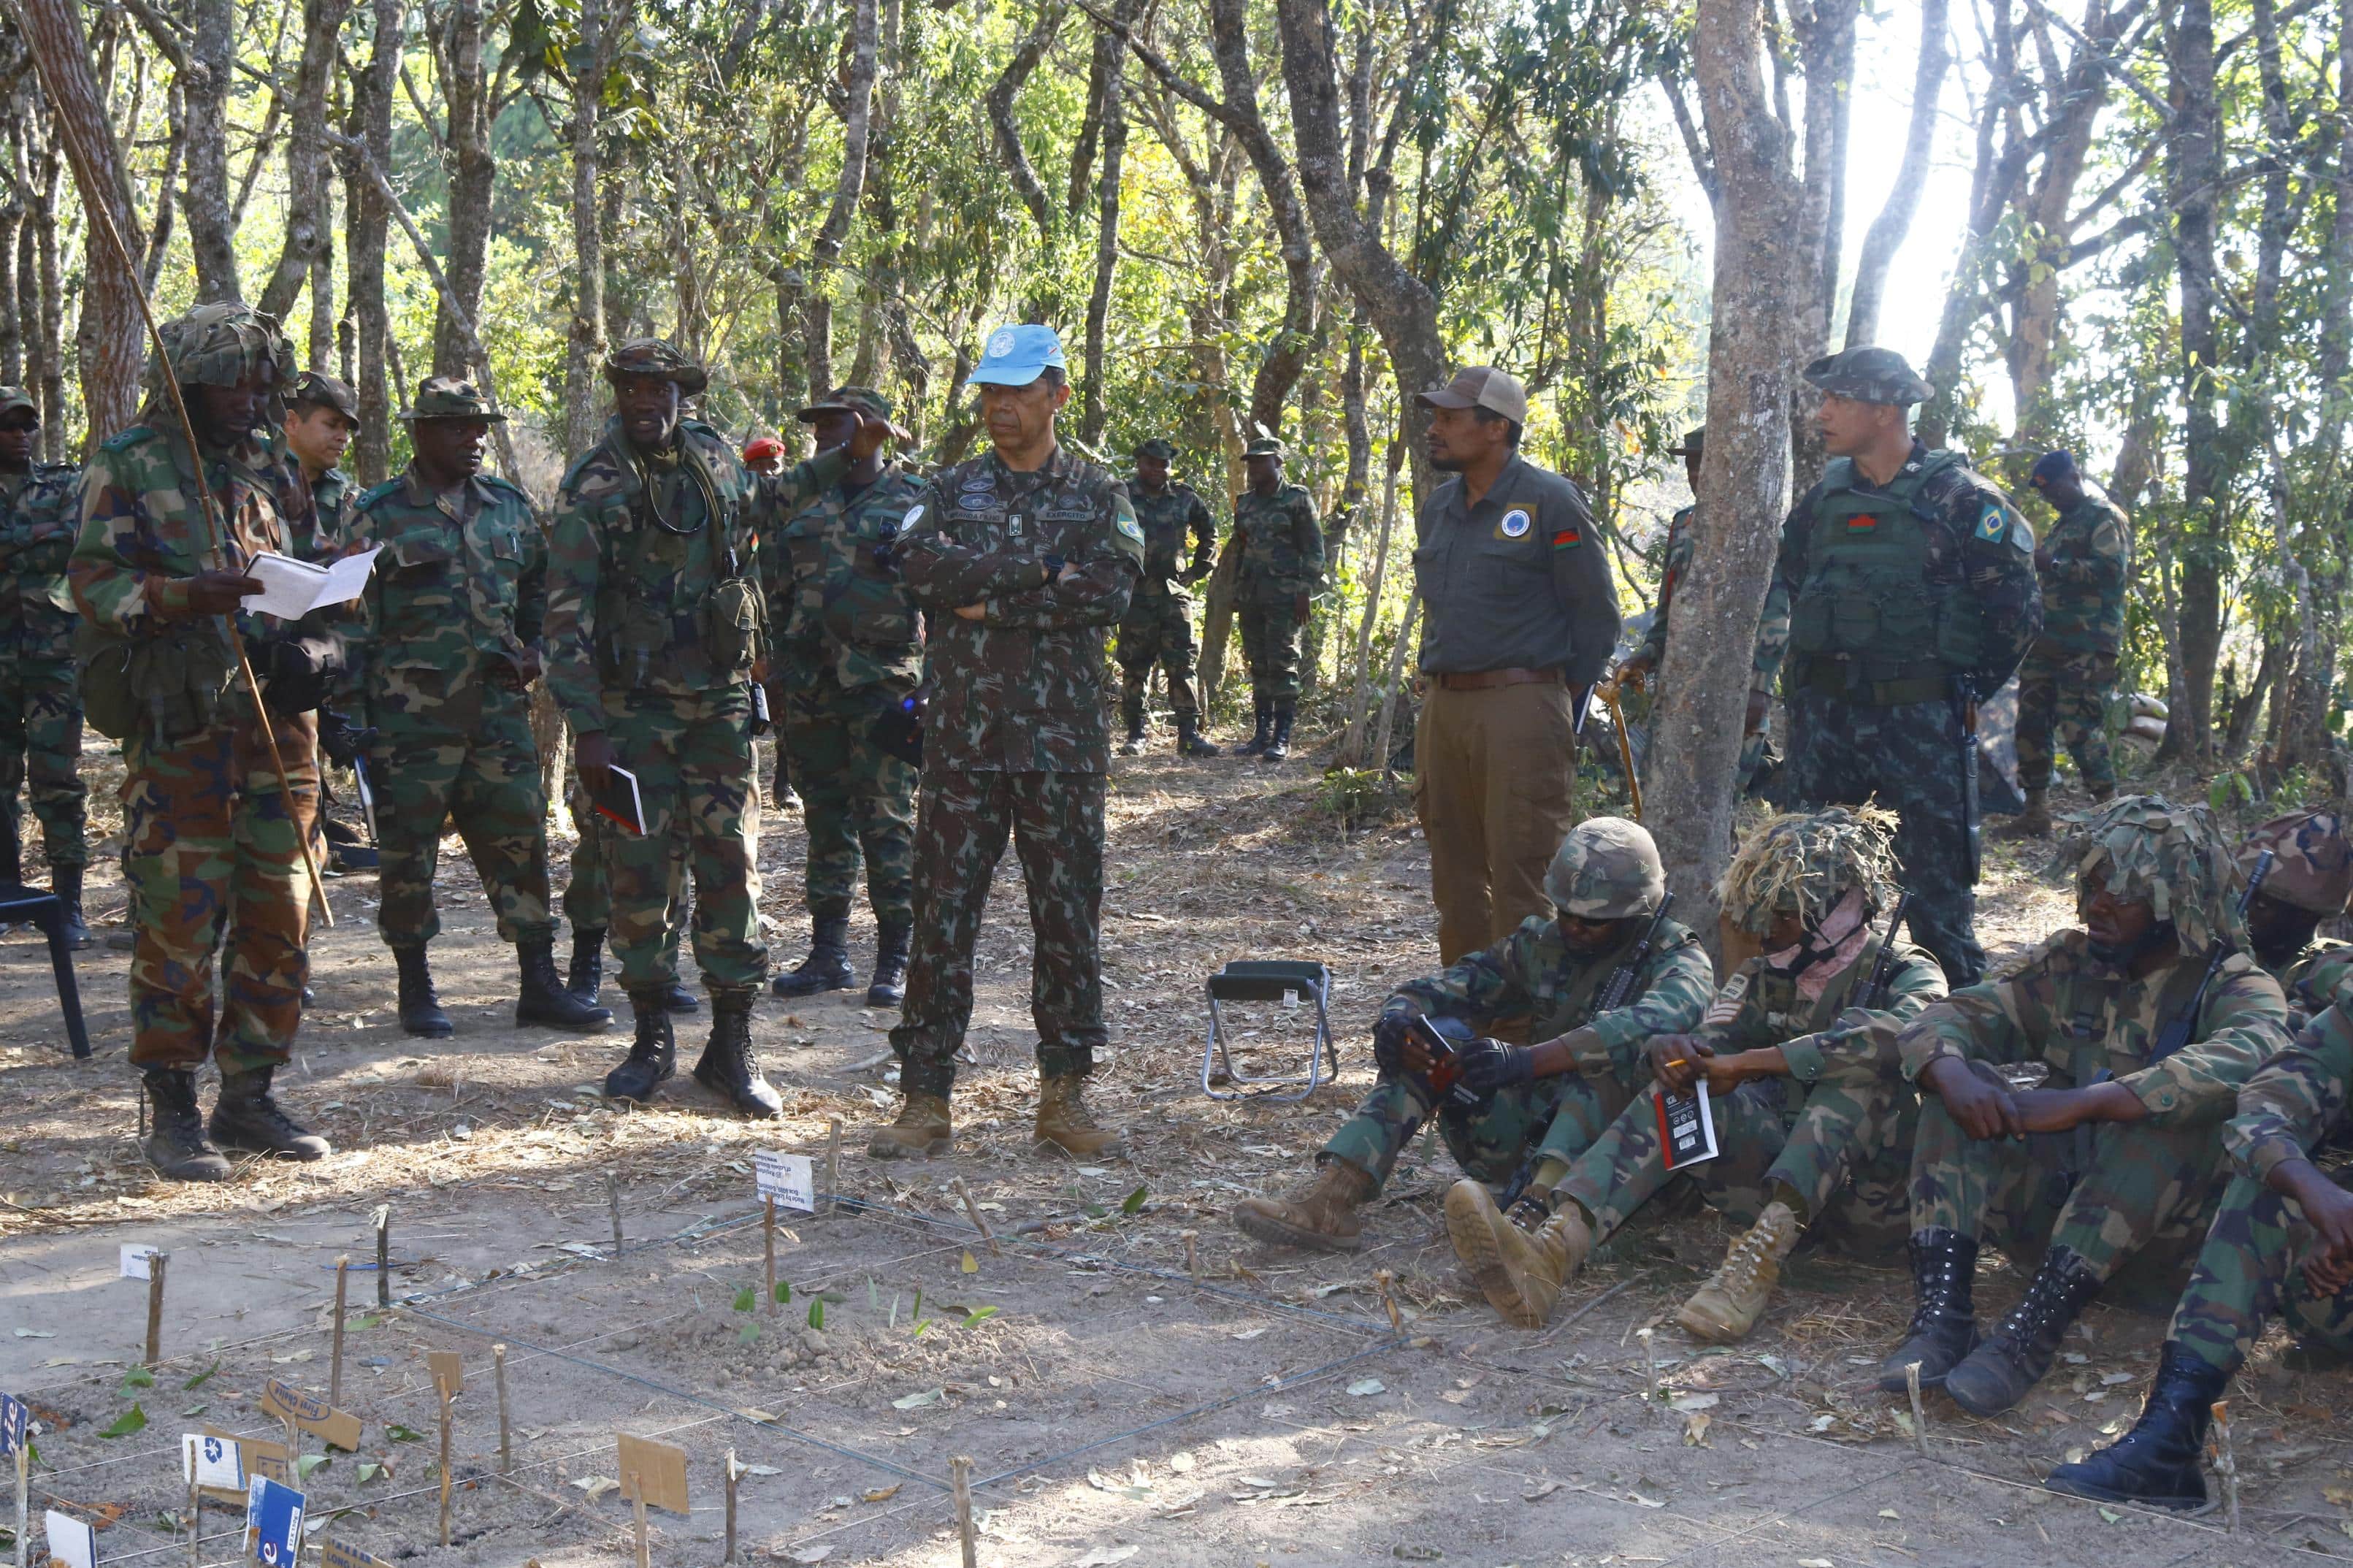 Lt. Gen. Miranda Filho, force commander of United Nations Organization Stabilization Mission in the Democratic Republic of the Congo (MONUSCO), visits the Jungle Warfare training base in Mzuzu, Malawi. SOCAFRICA synchronized with international partners from Brazil and the U.K. to conduct JW training with Malawian forces that concluded October 20, 2023, to support their U.N. operations in Africa.